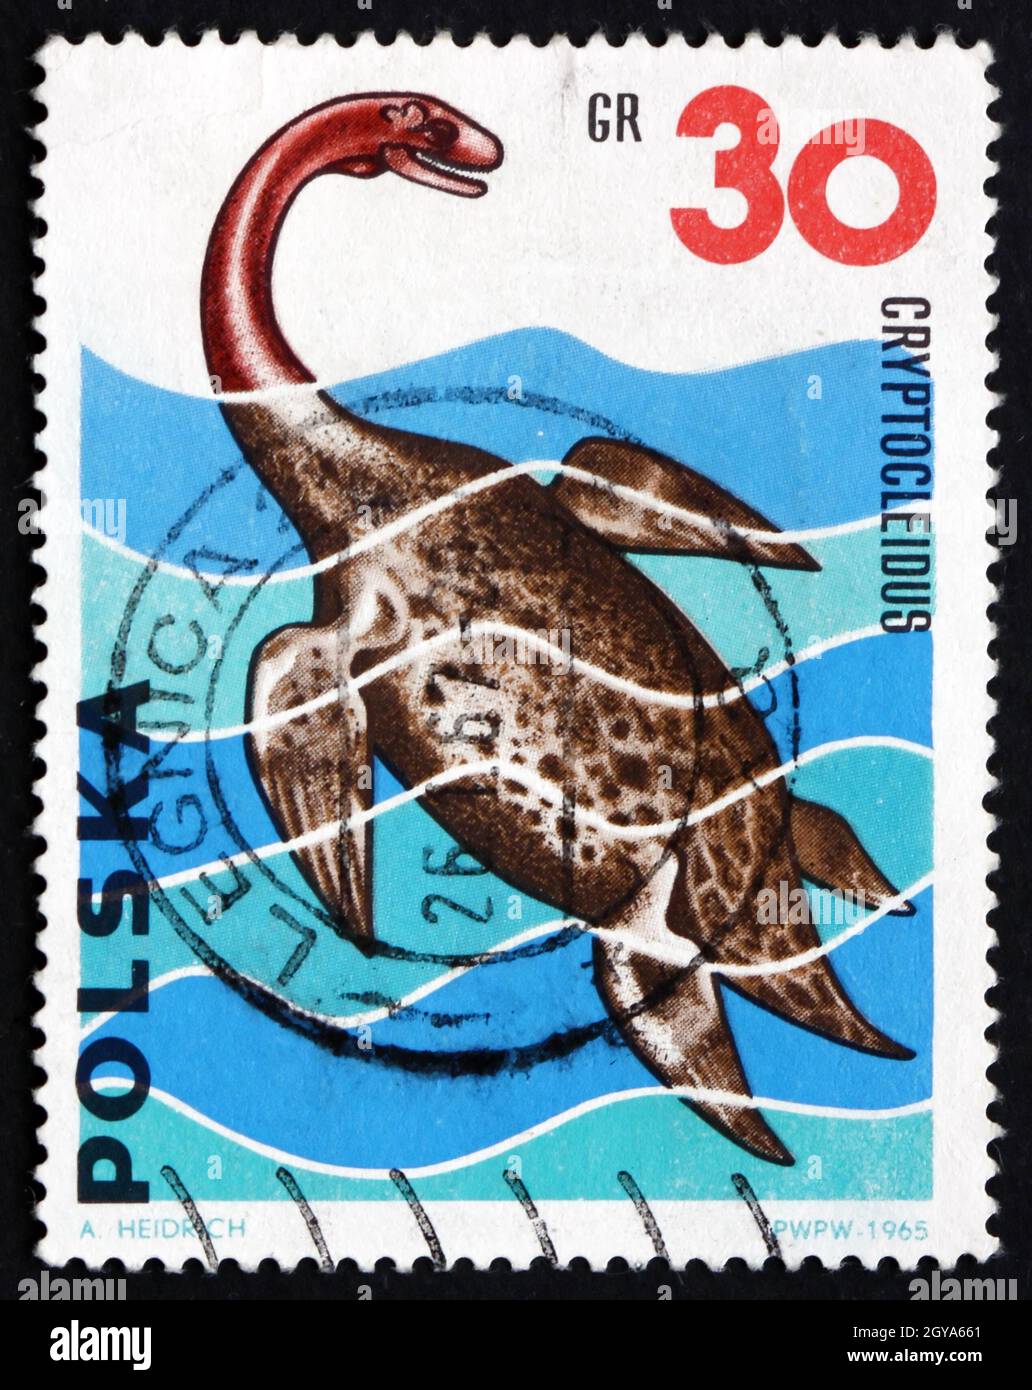 POLAND - CIRCA 1965: a stamp printed in Poland shows Cryptocleidus, was a Genus of Plesiosaur from the Middle Jurrasic Period, Dinosaur, circa 1965 Stock Photo